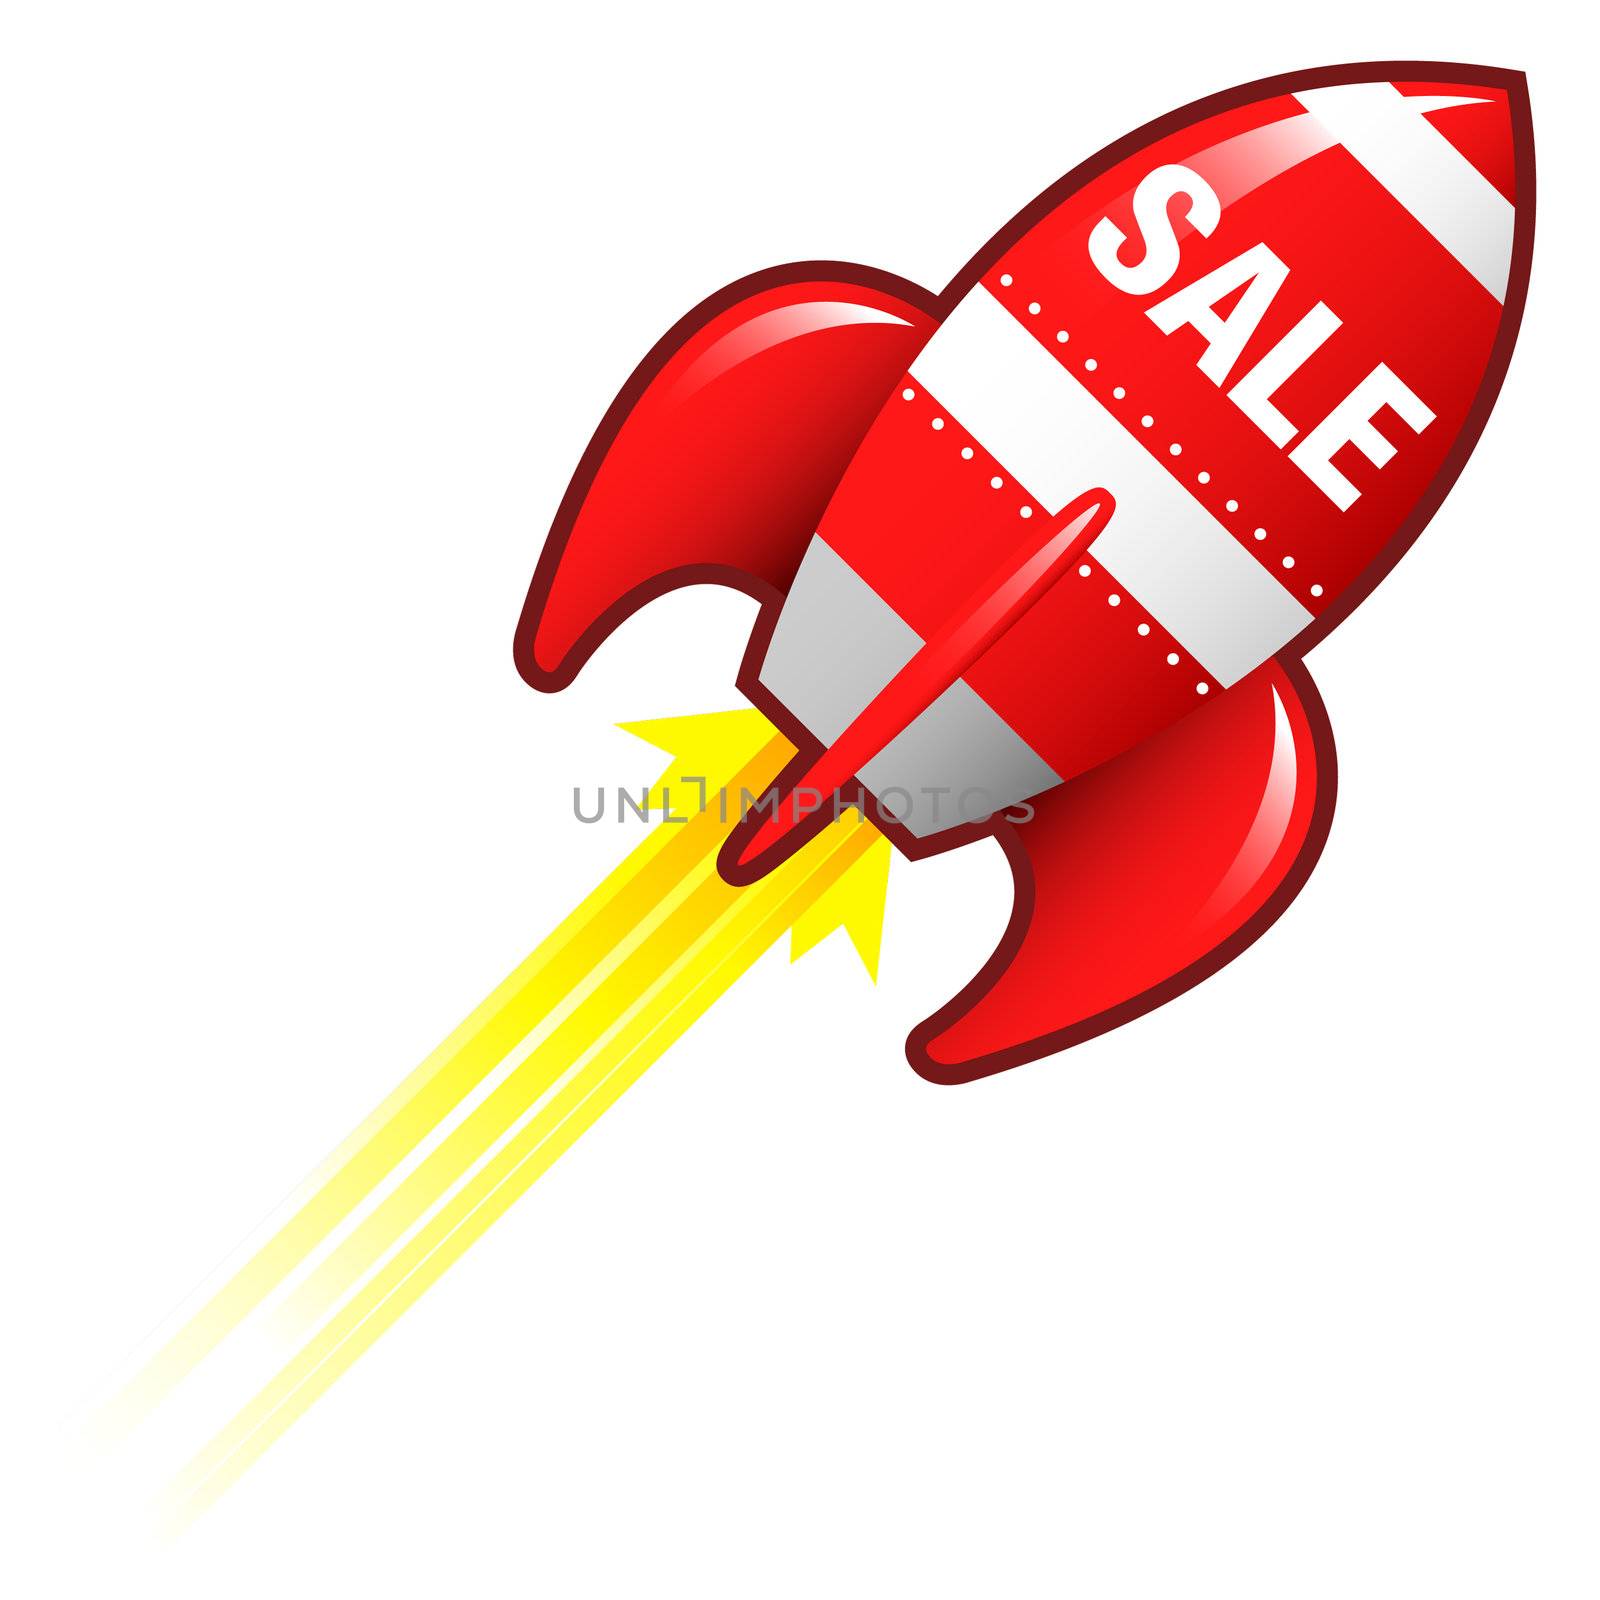 Sale e-commerce icon on red retro rocket ship illustration good for use as a button, in print materials, or in advertisements.